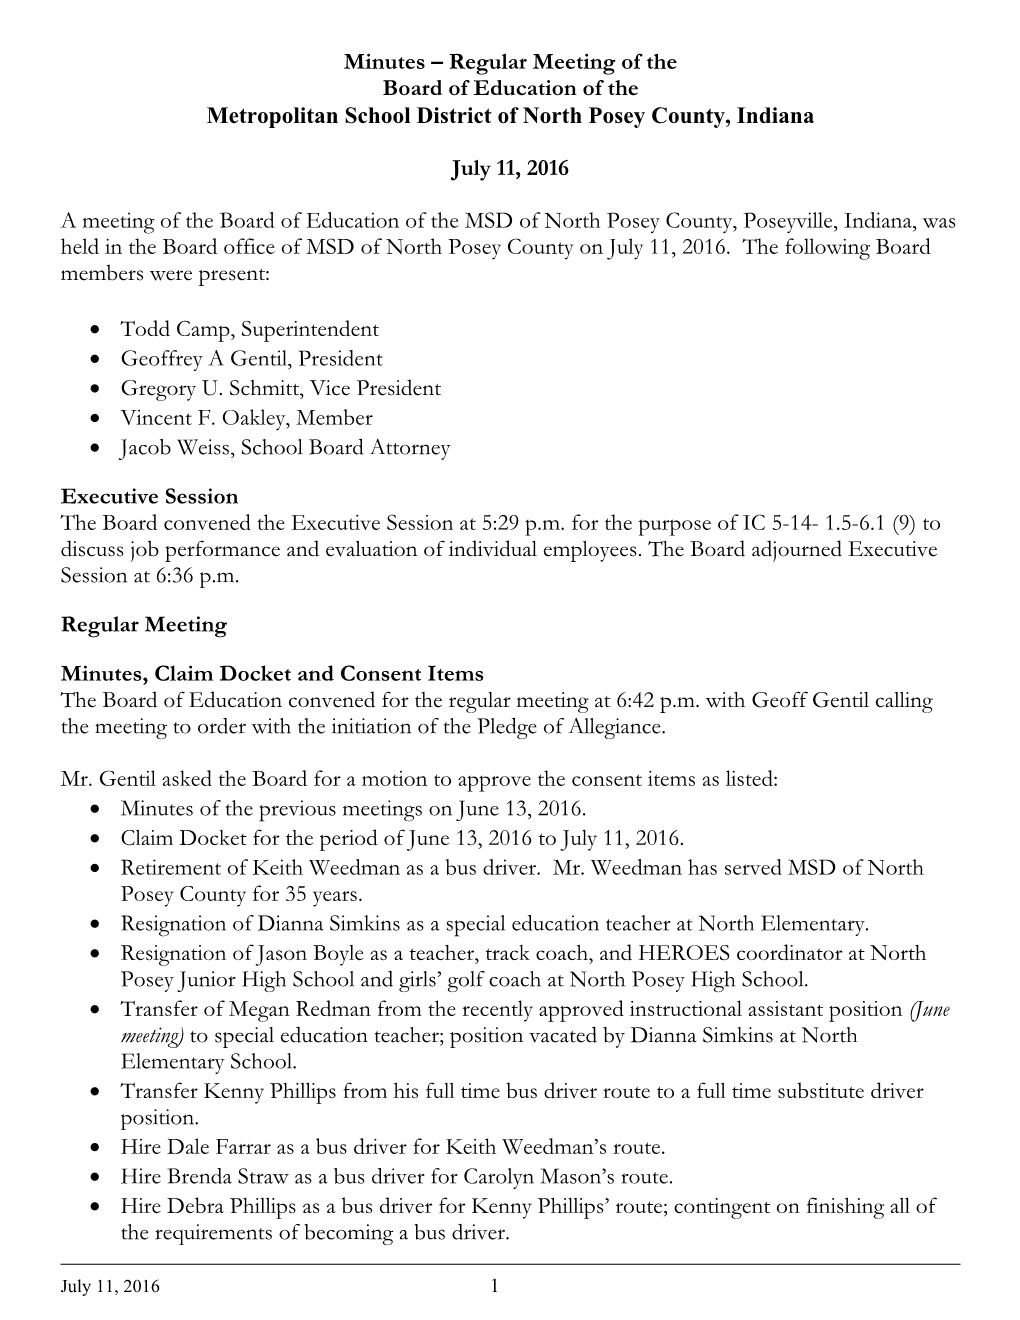 Minutes – Regular Meeting of the Board of Education of the Metropolitan School District of North Posey County, Indiana